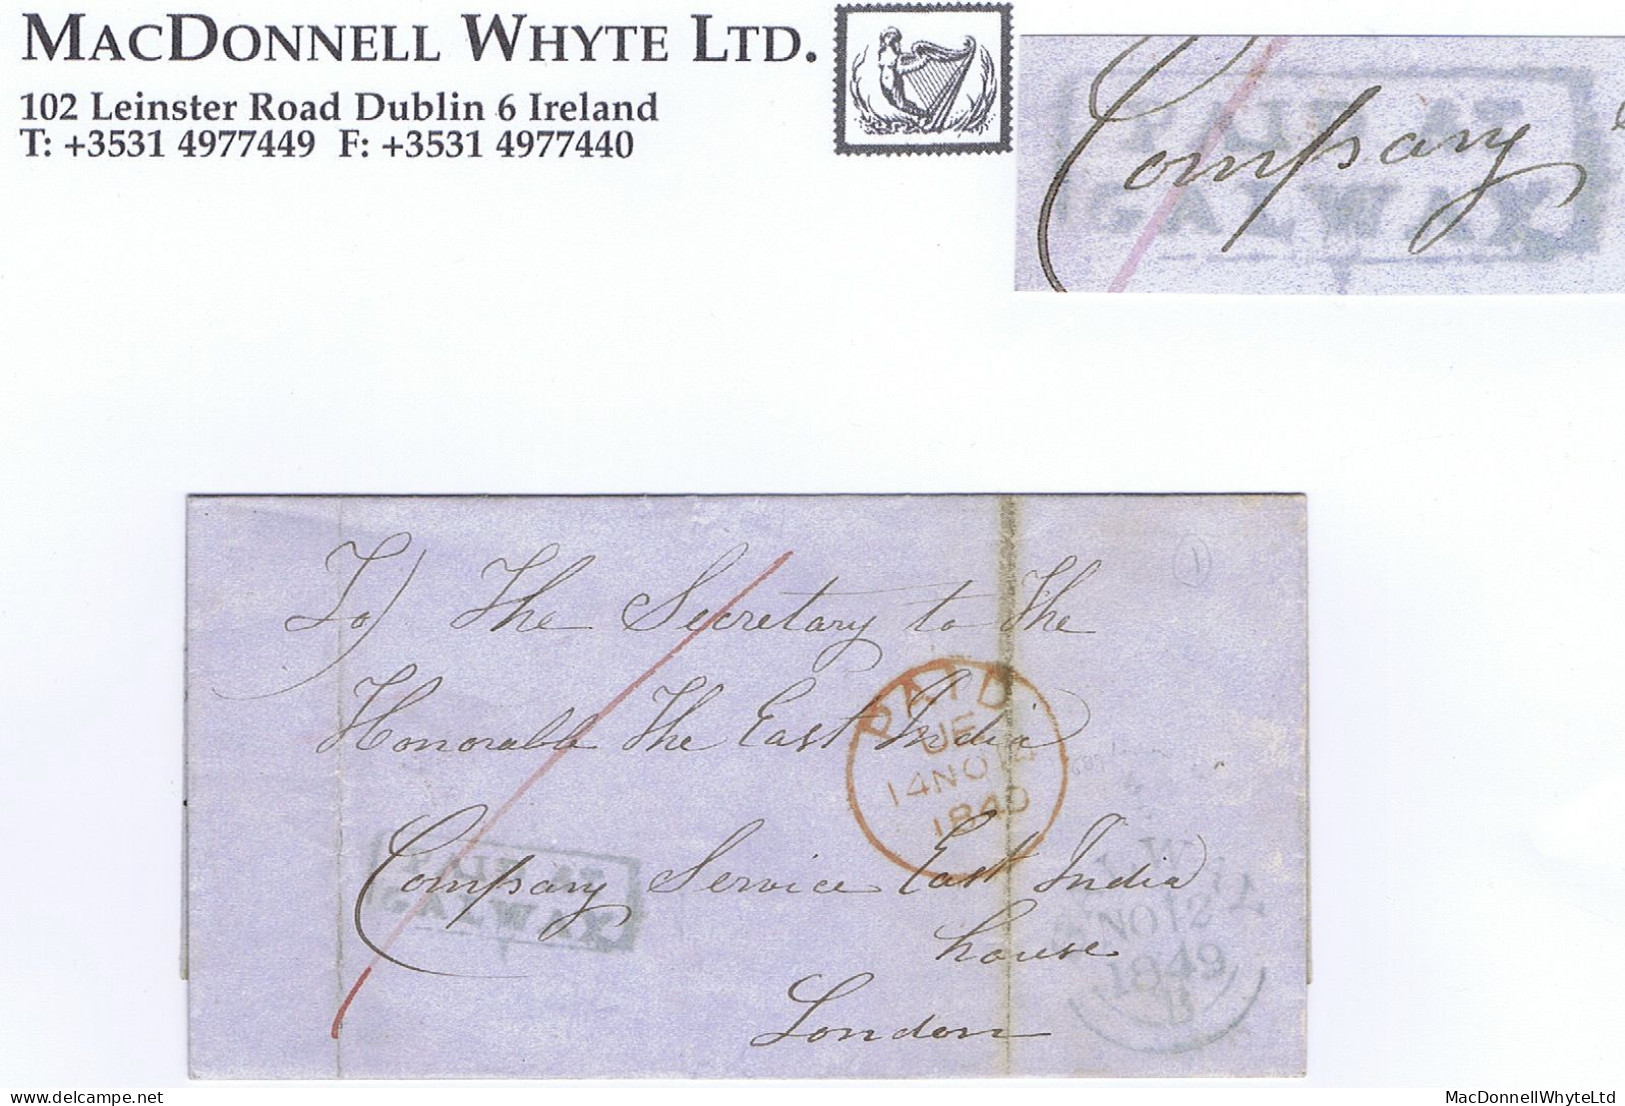 Ireland Galway Uniform Penny Post 1849 Cover To London With 2-line PAID AT/GALWAY In Grey-blue, GALWAY NO 12 1849 Cds - Prephilately